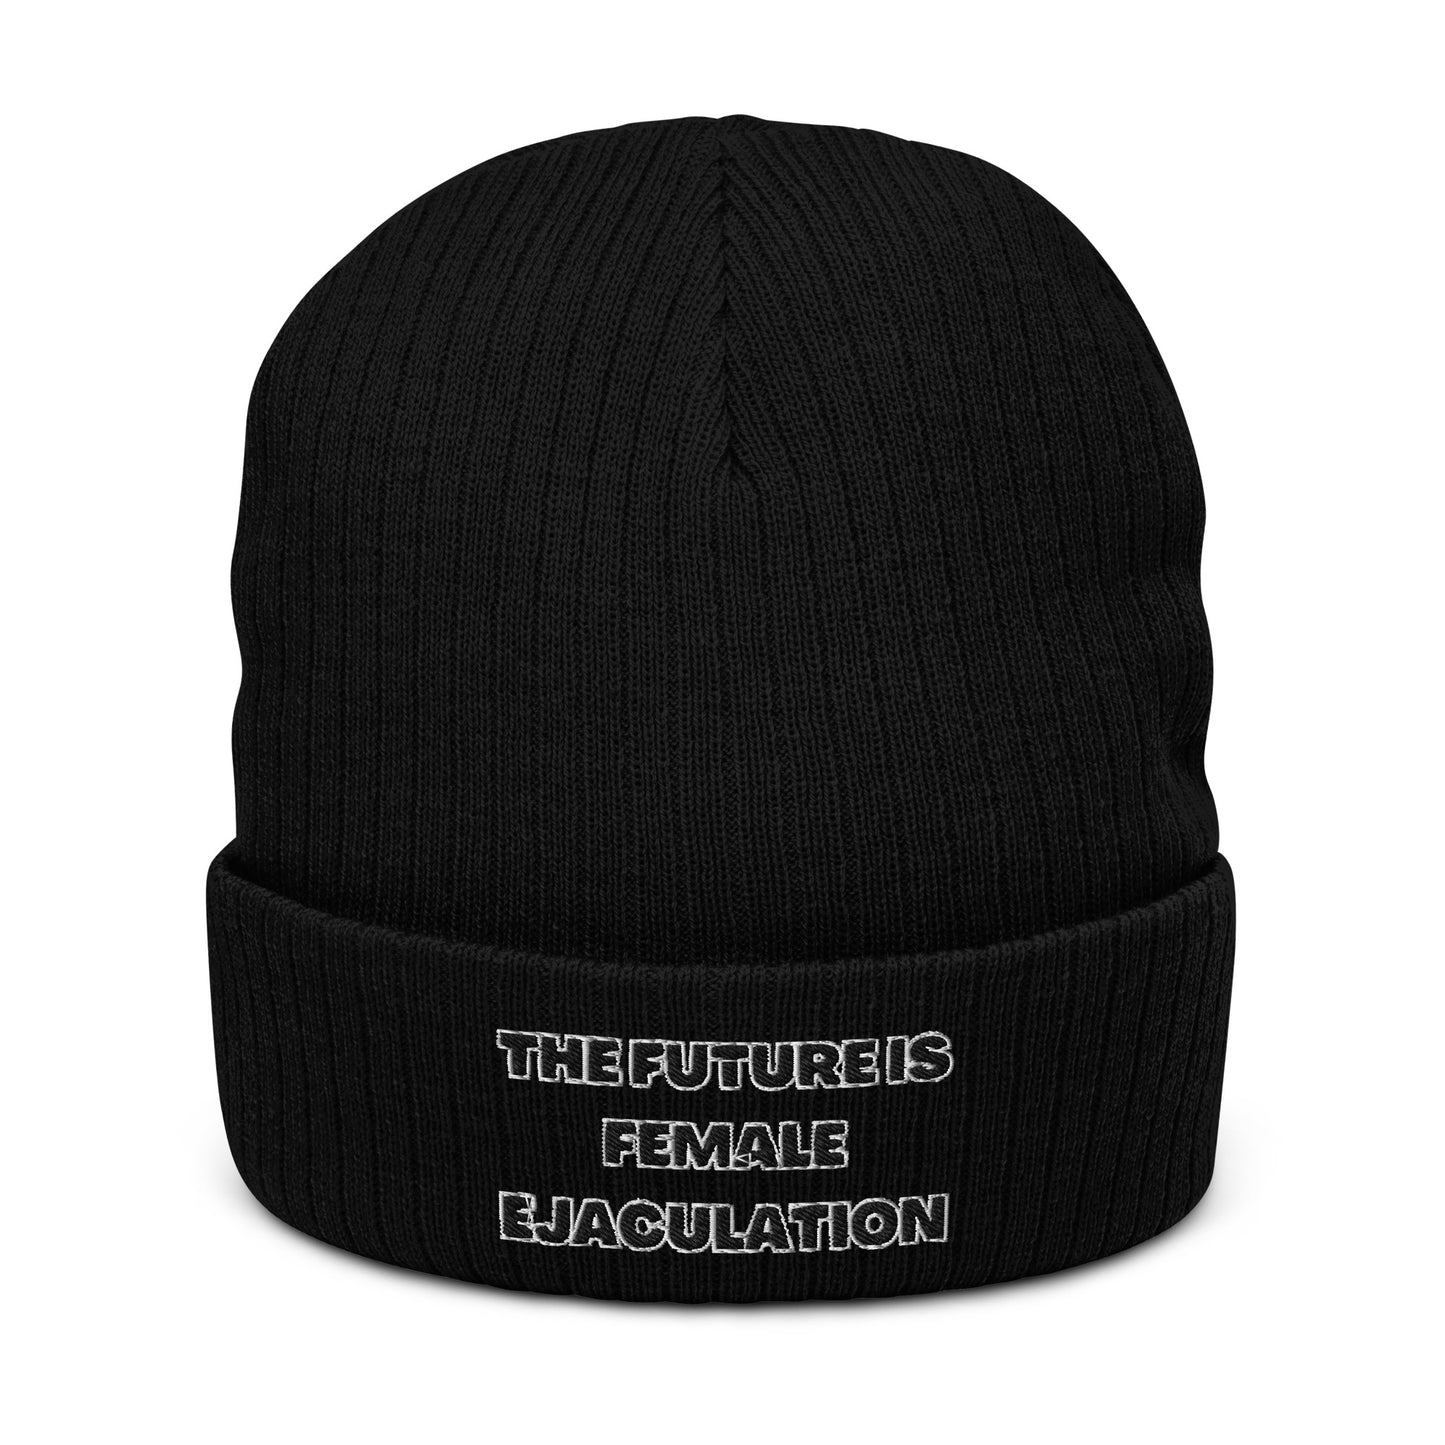 Future Is Female Ejaculation Ribbed Knit Beanie